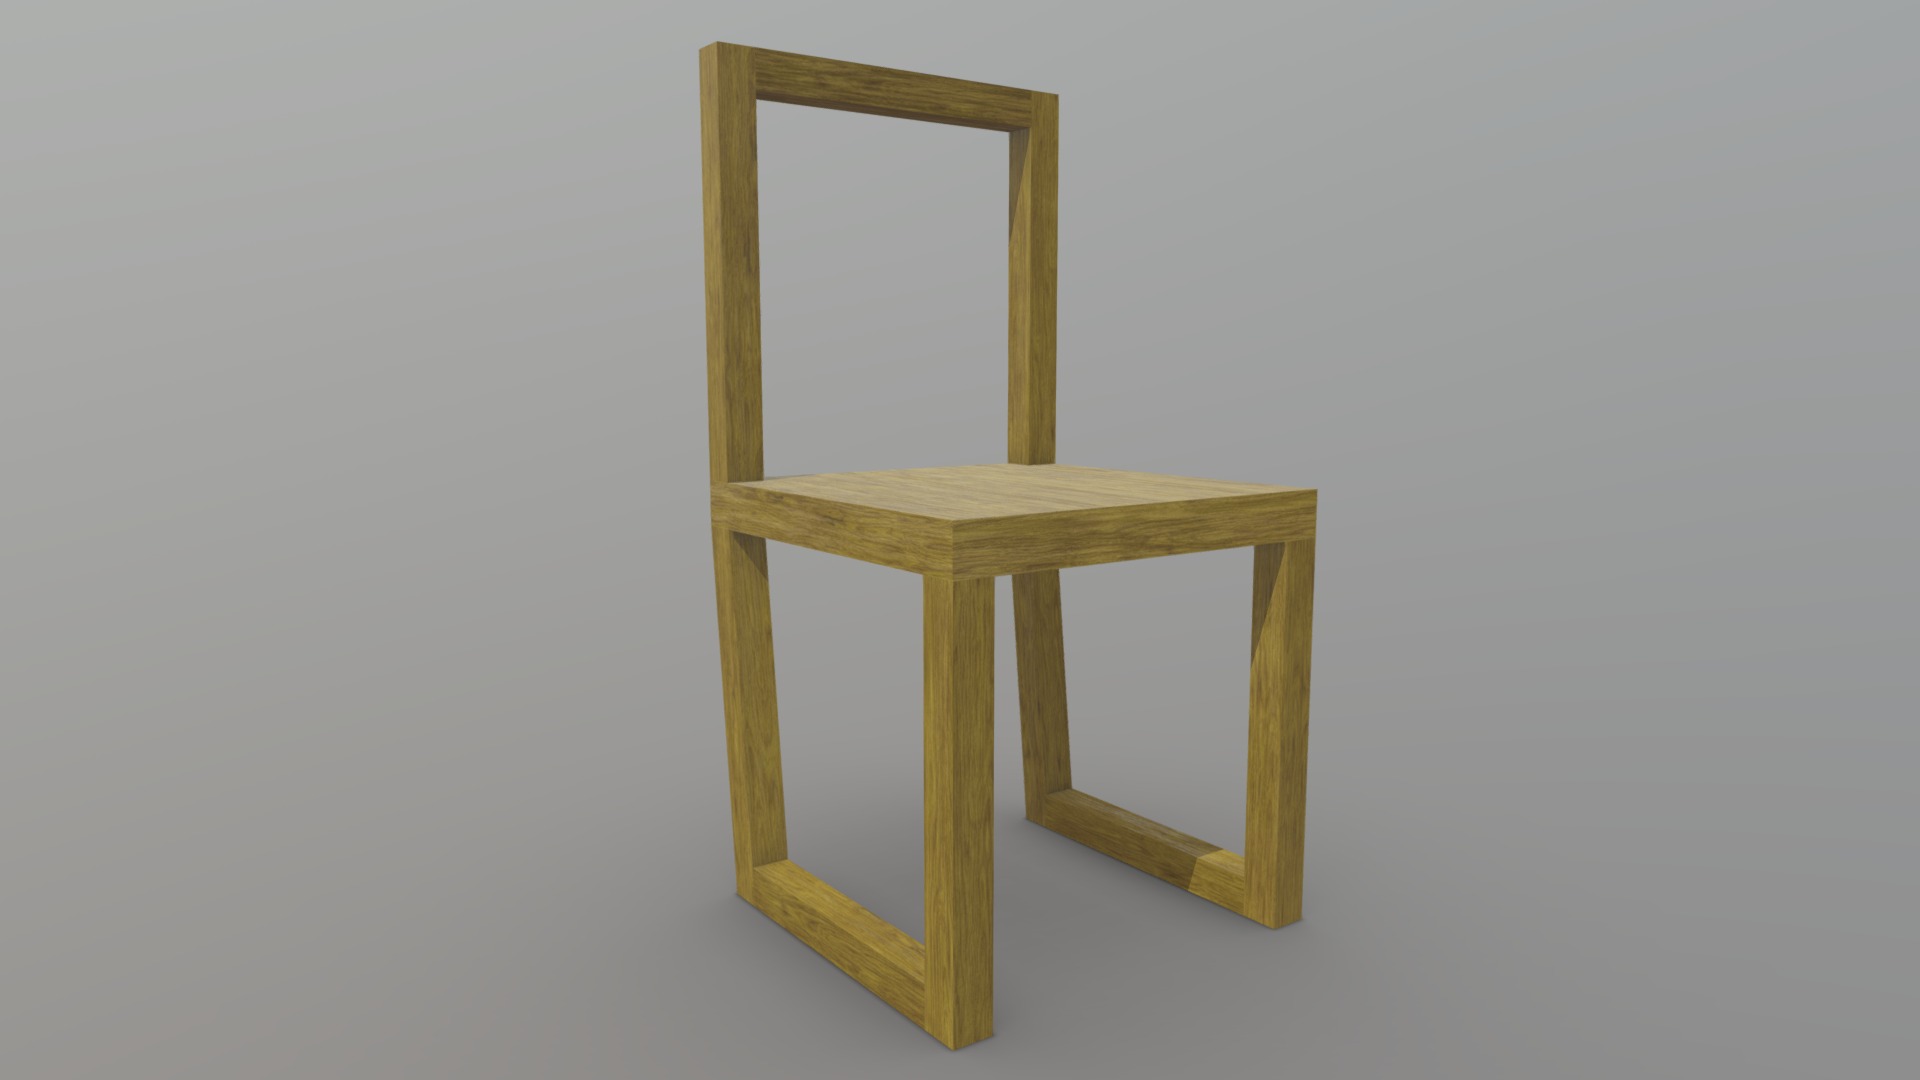 3D model Chamfer Design - This is a 3D model of the Chamfer Design. The 3D model is about a wooden table in a room.